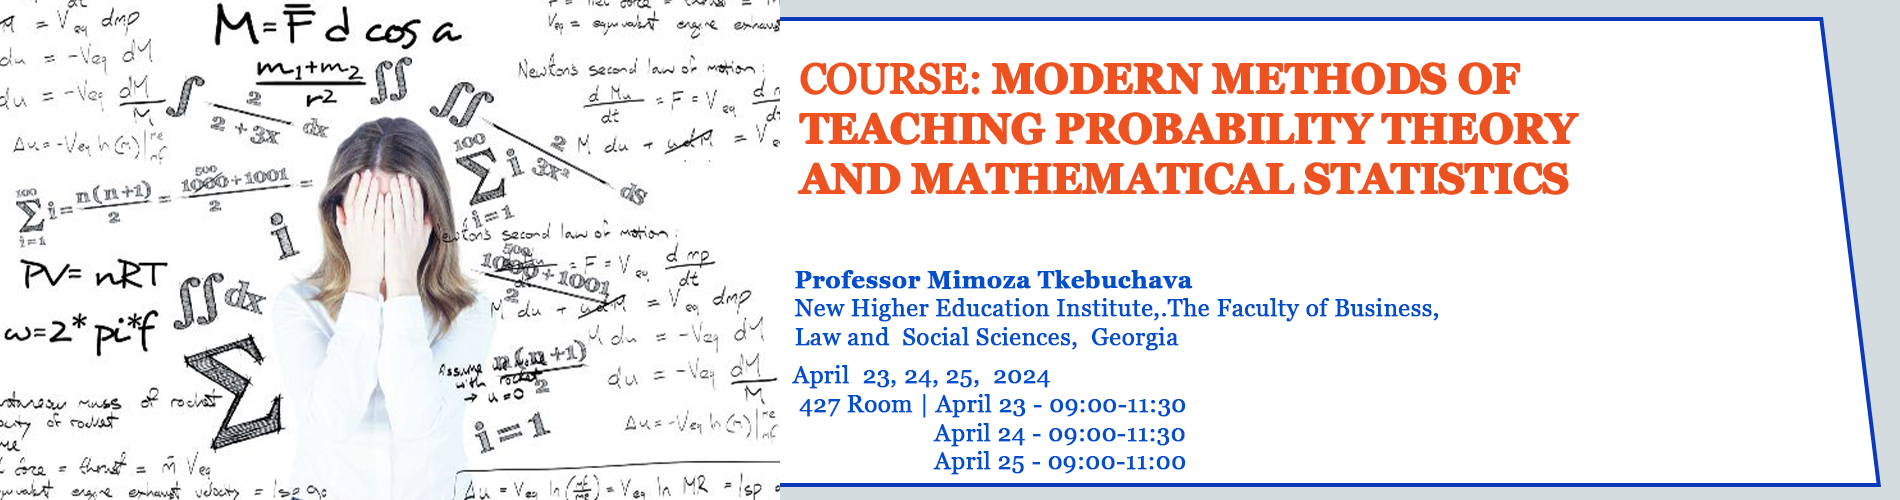 20240423-_20240425_-_Modern_methods_of_teaching_probability_theory_and_mathematical_statistics